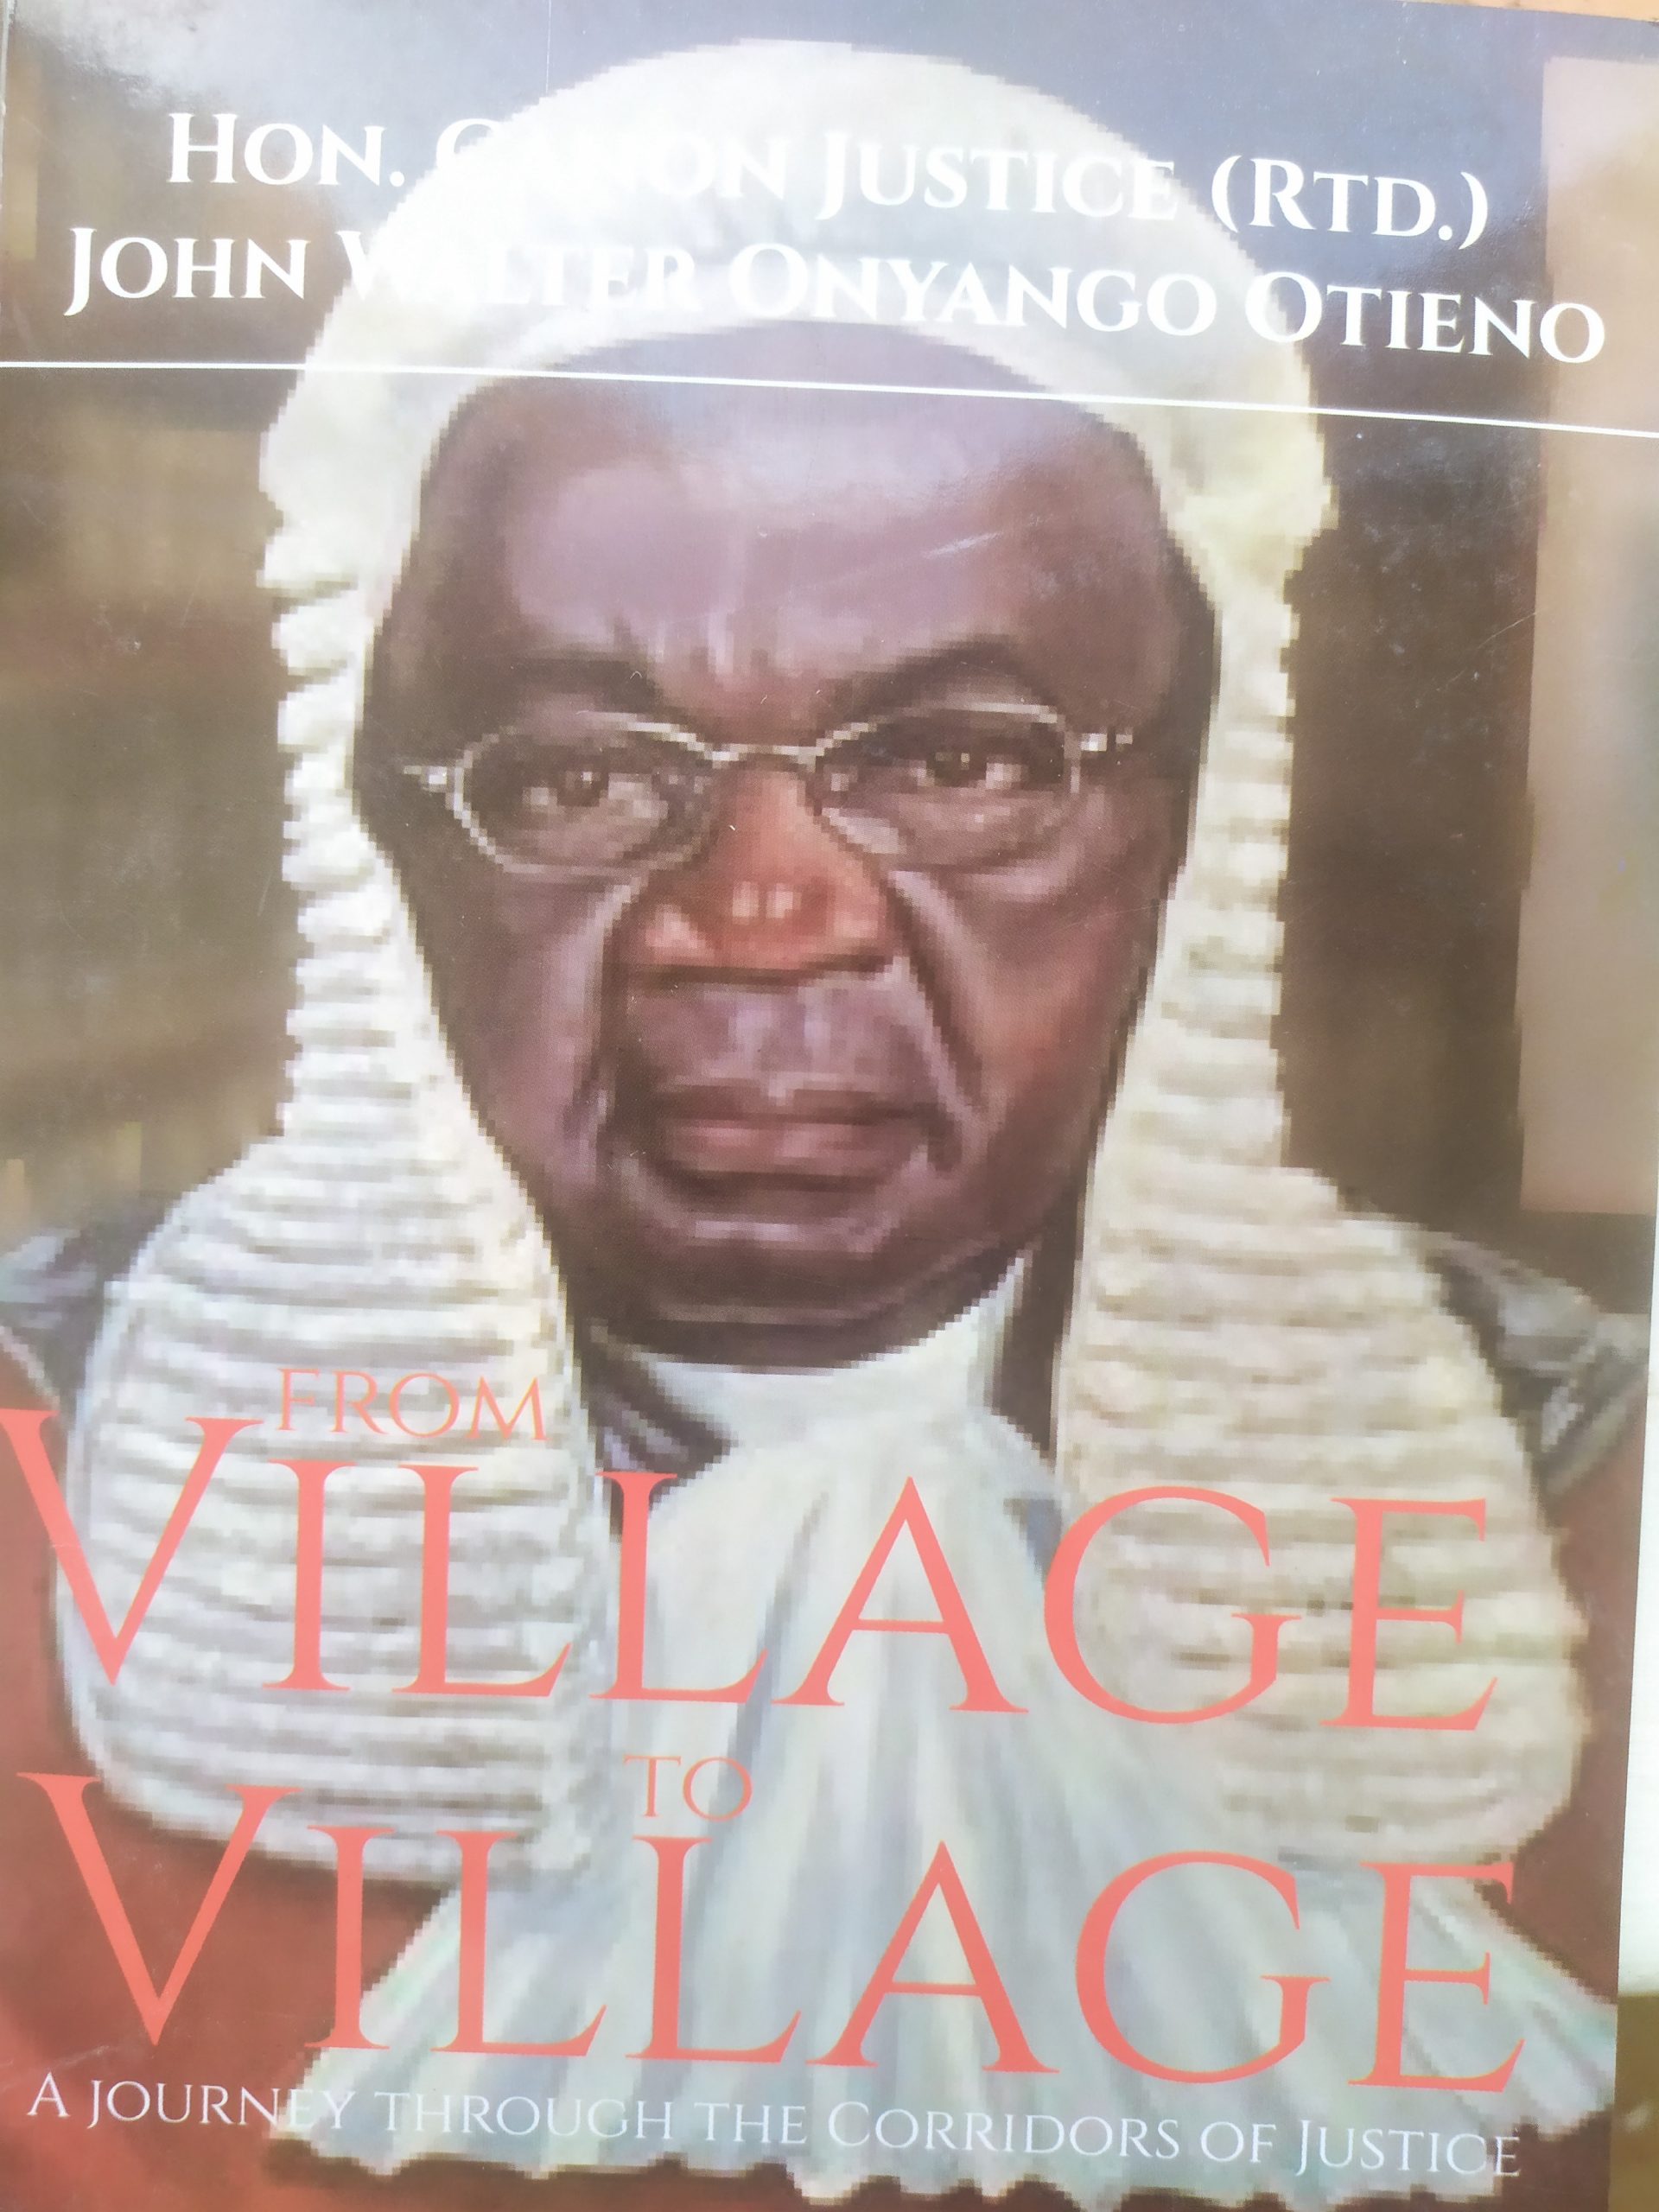 From Village to village, details the amazing journey of Lay Cannon Justice (rtd) Onyango Otieno from his rural village in Kandaria, Asembo, to the highest echelons of the Legal Profession.  This exciting journey tells us of the numerous tests he faced as a Lawyer and a Judge on the corridors of Justice. A true authentic look at the system.